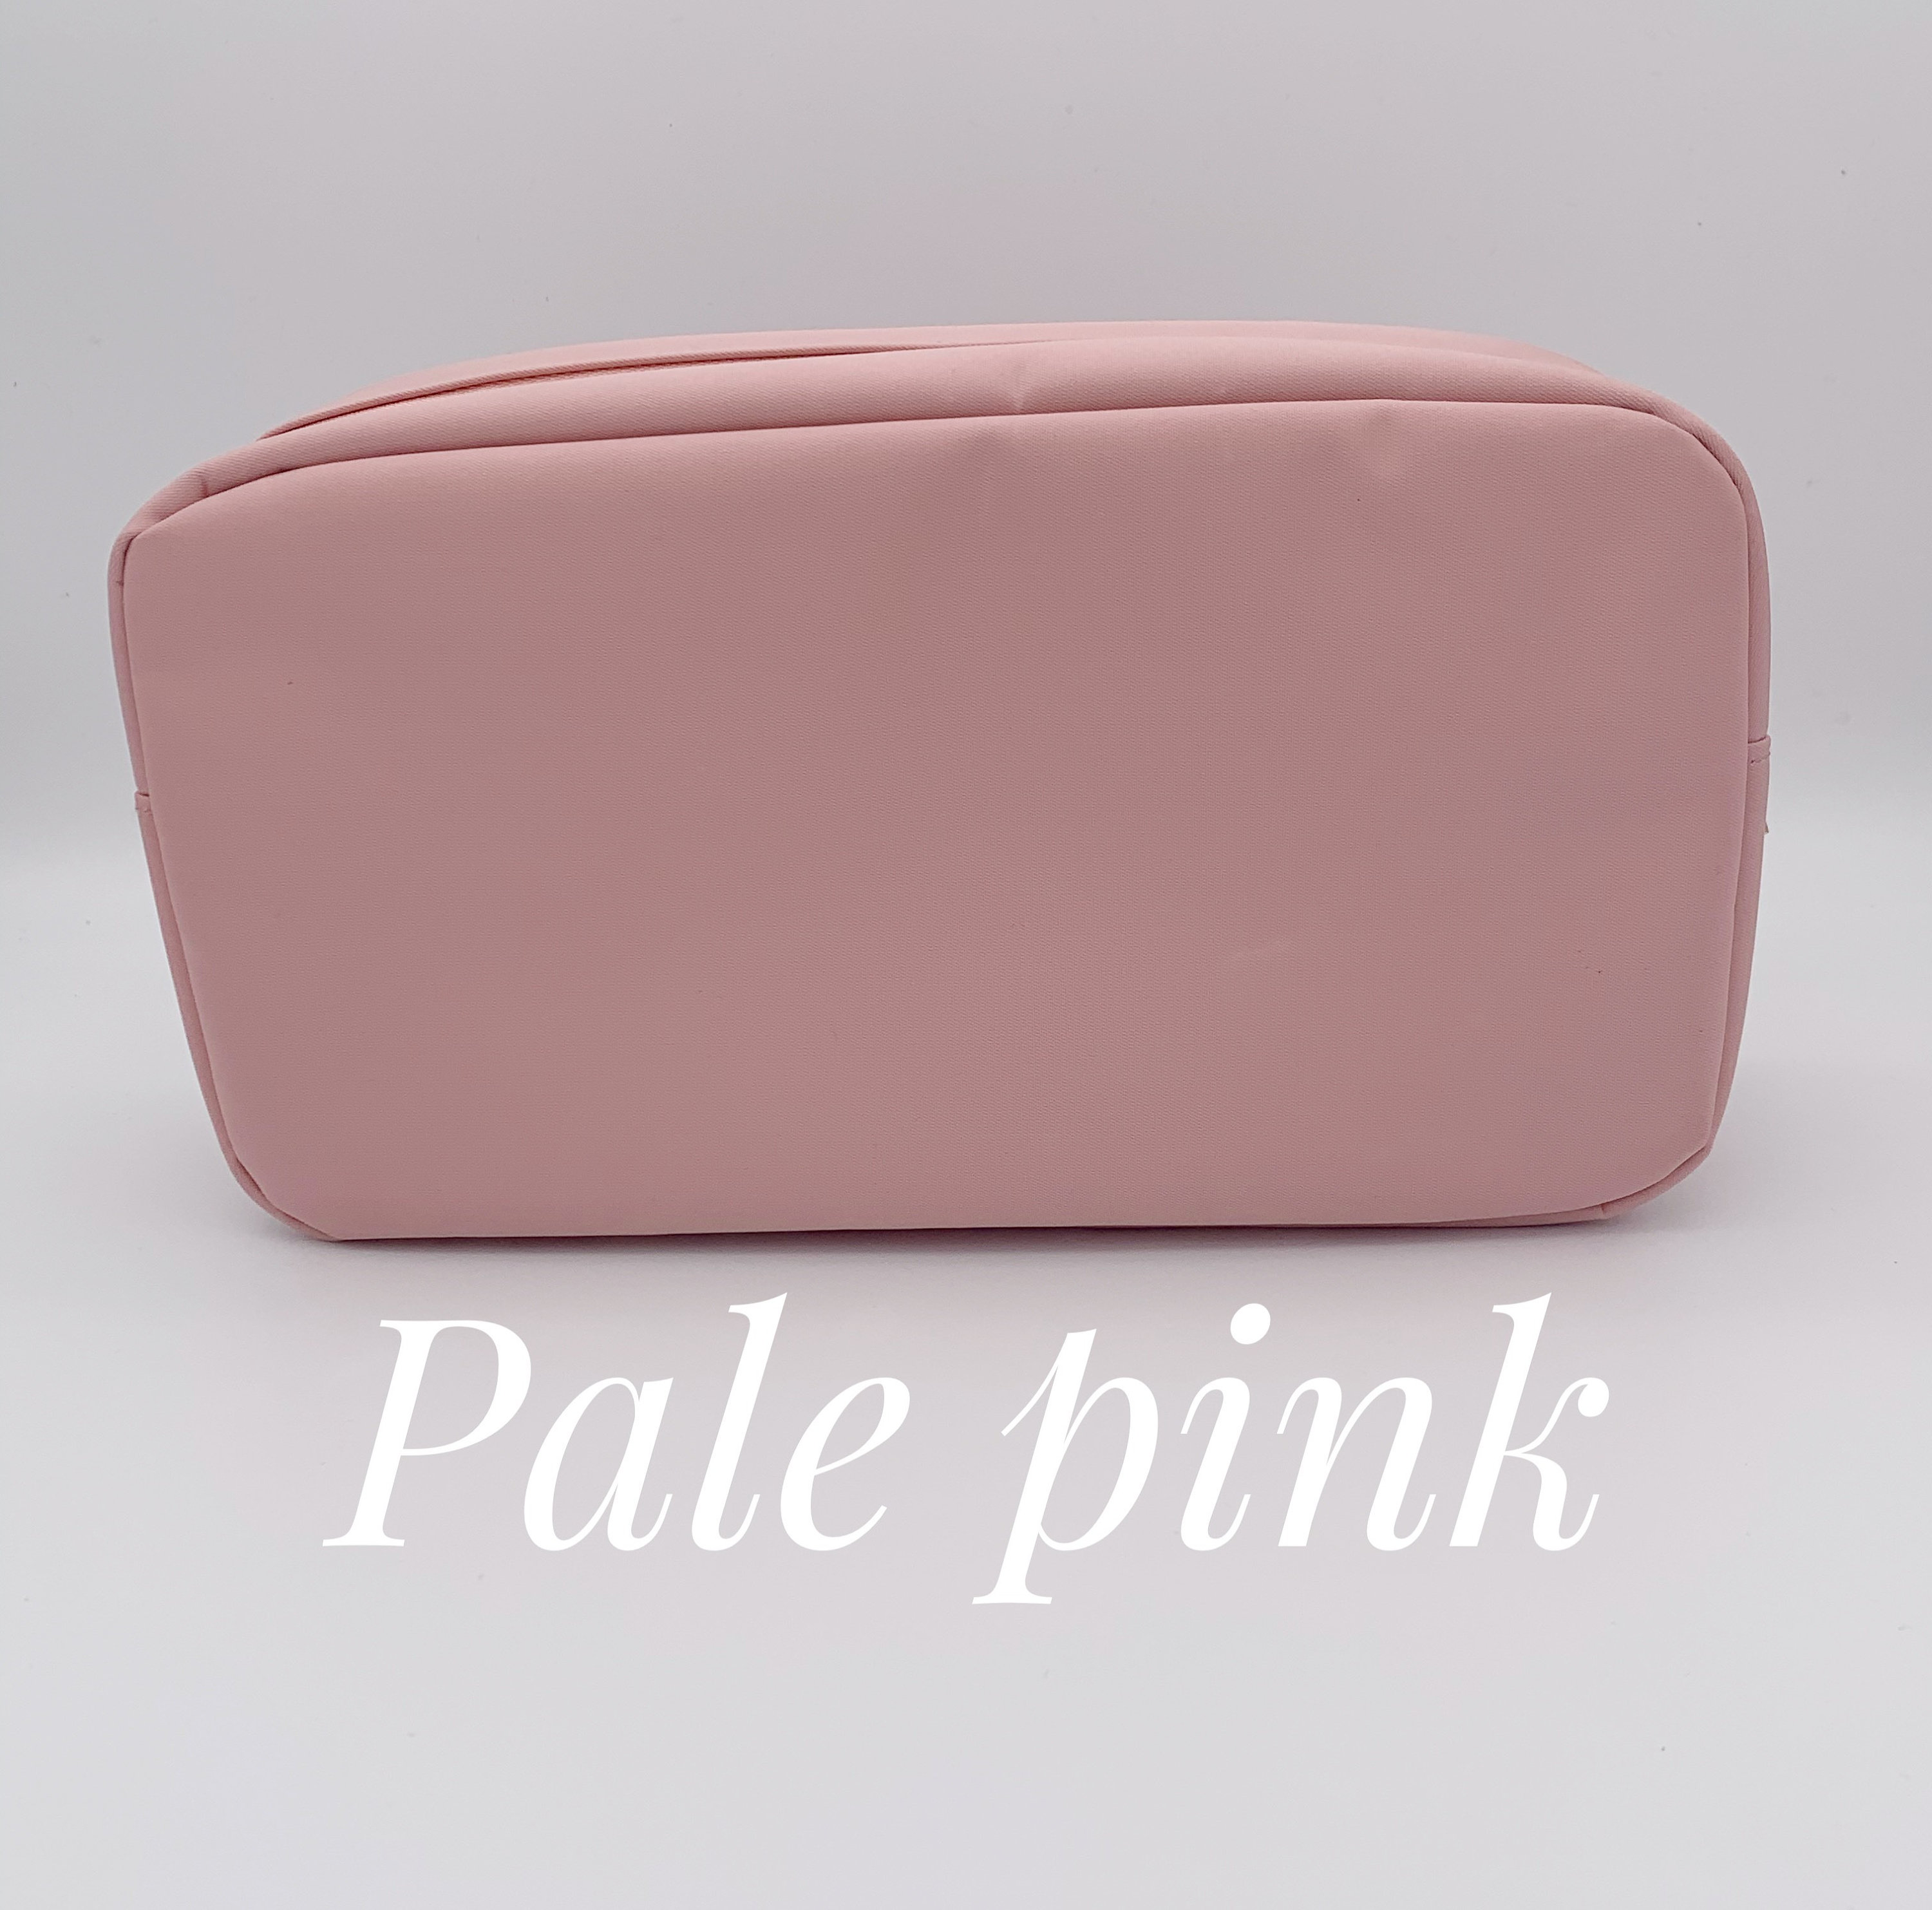 8.6.4 Nylon Pouch - Large Pink